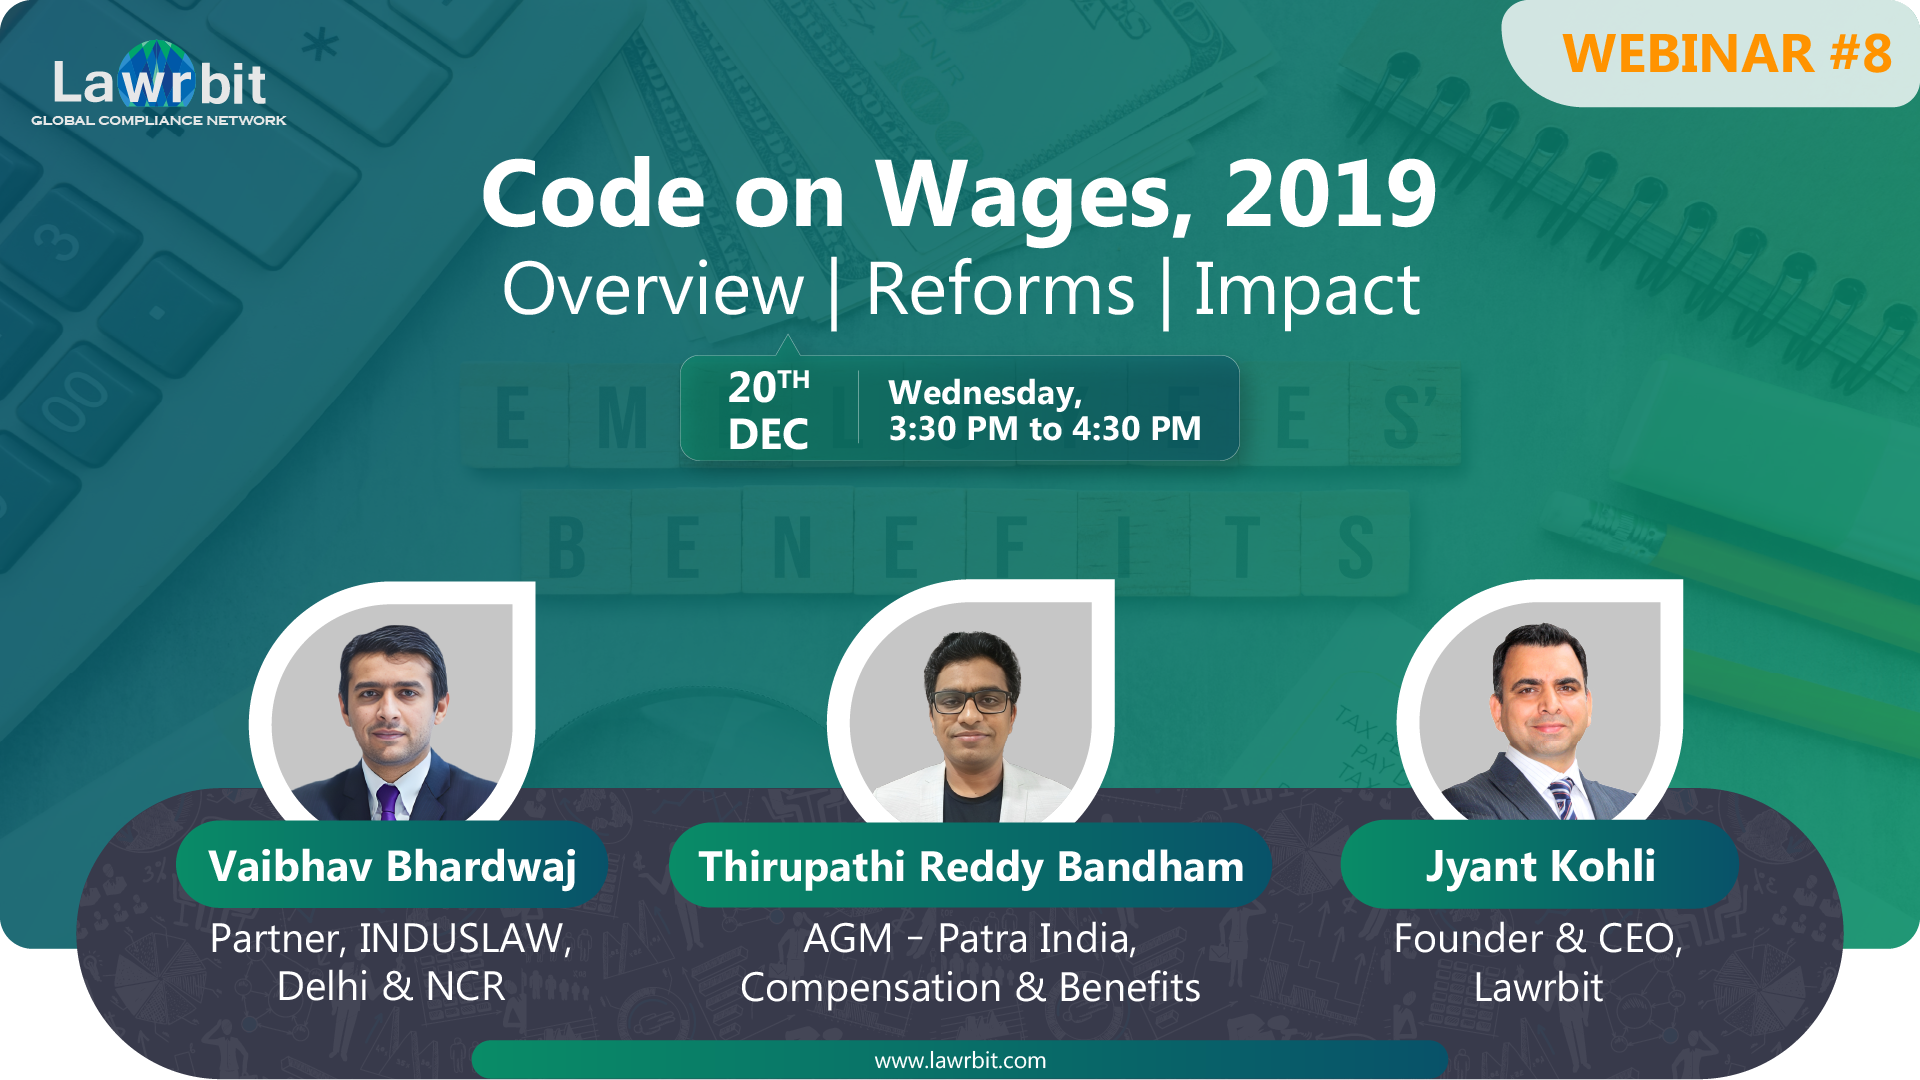 Panel Discussion with Industry Experts on Code on Wages, 2019